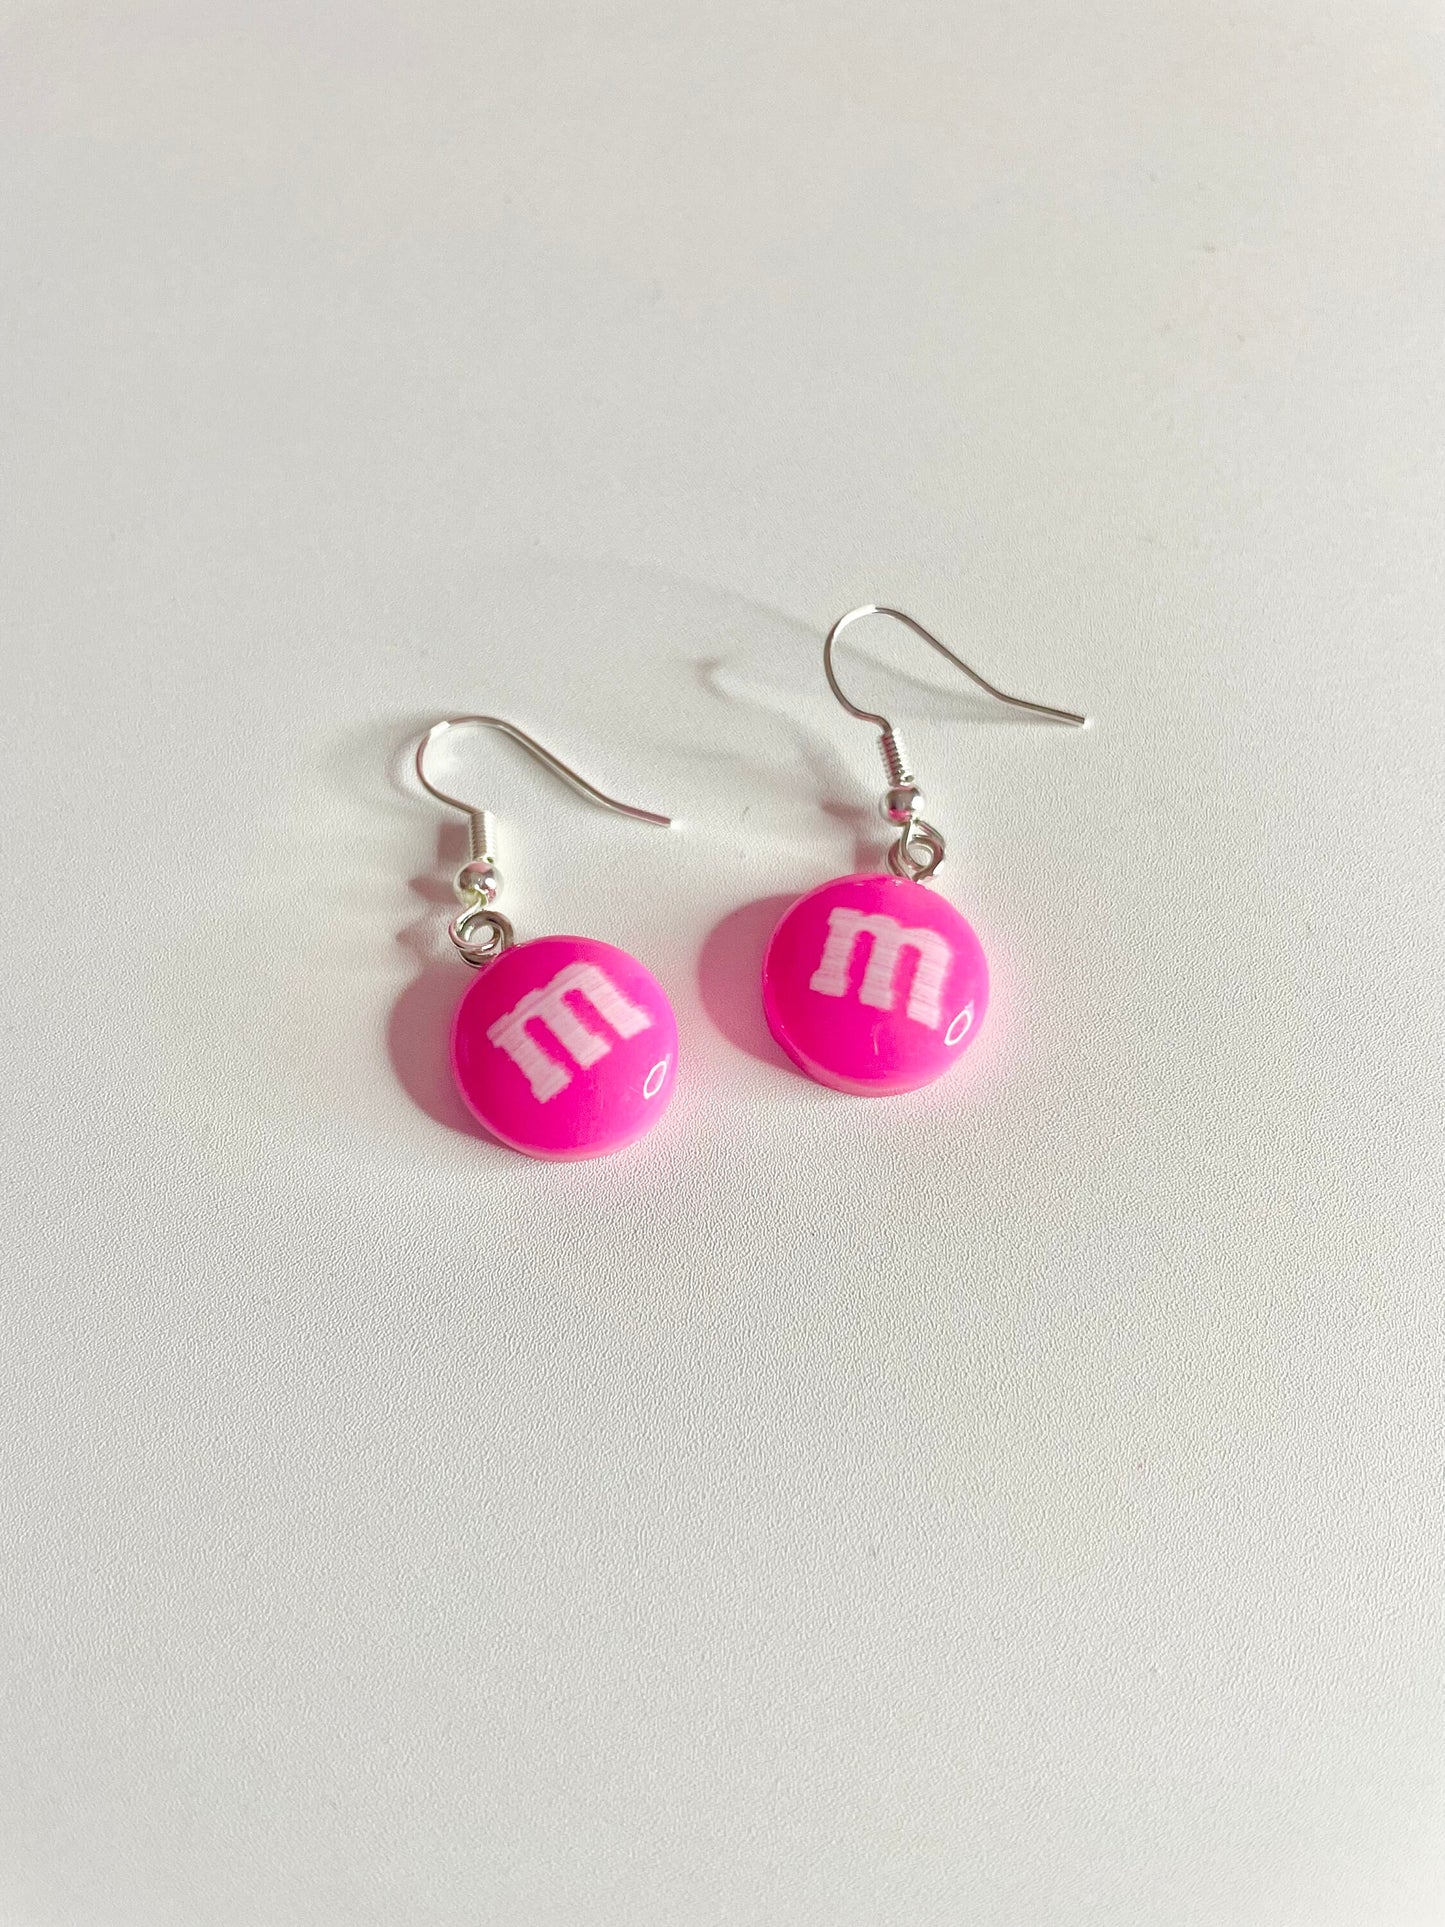 M&M Chocolate Candy Sterling Silver Earrings